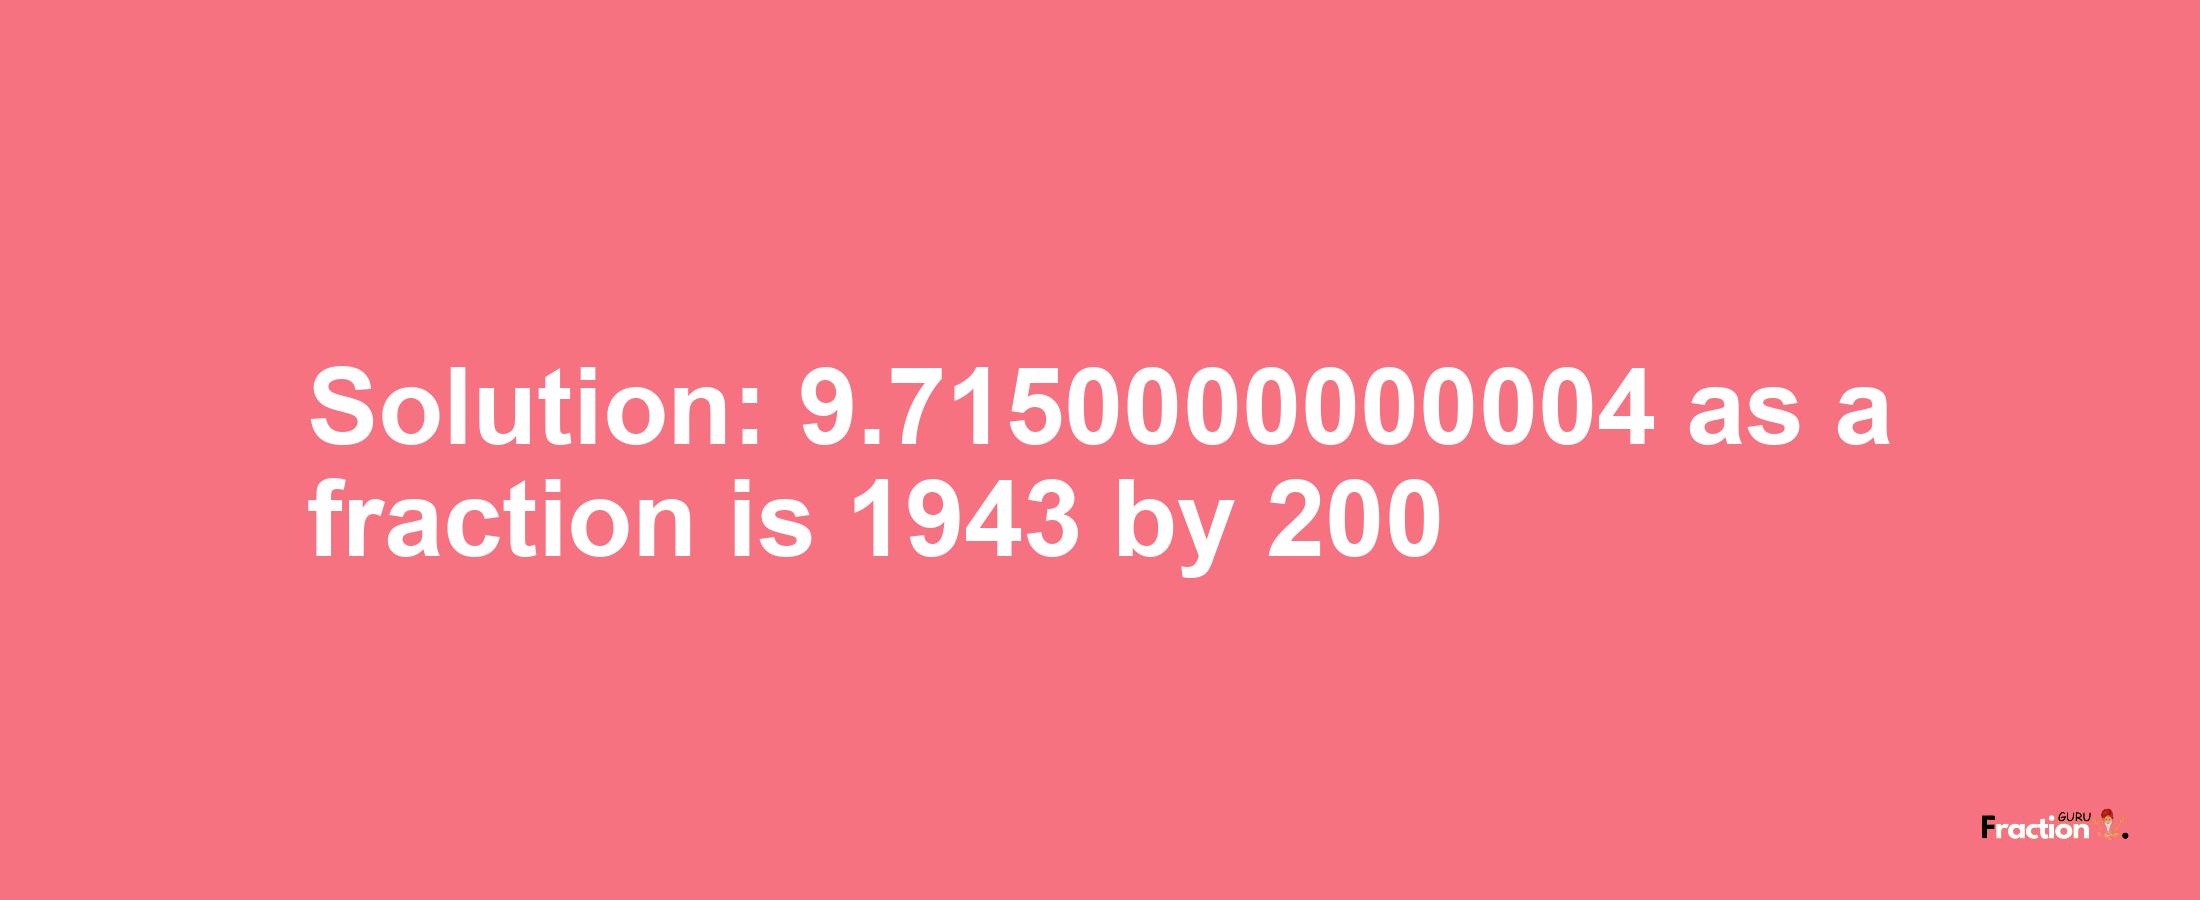 Solution:9.7150000000004 as a fraction is 1943/200